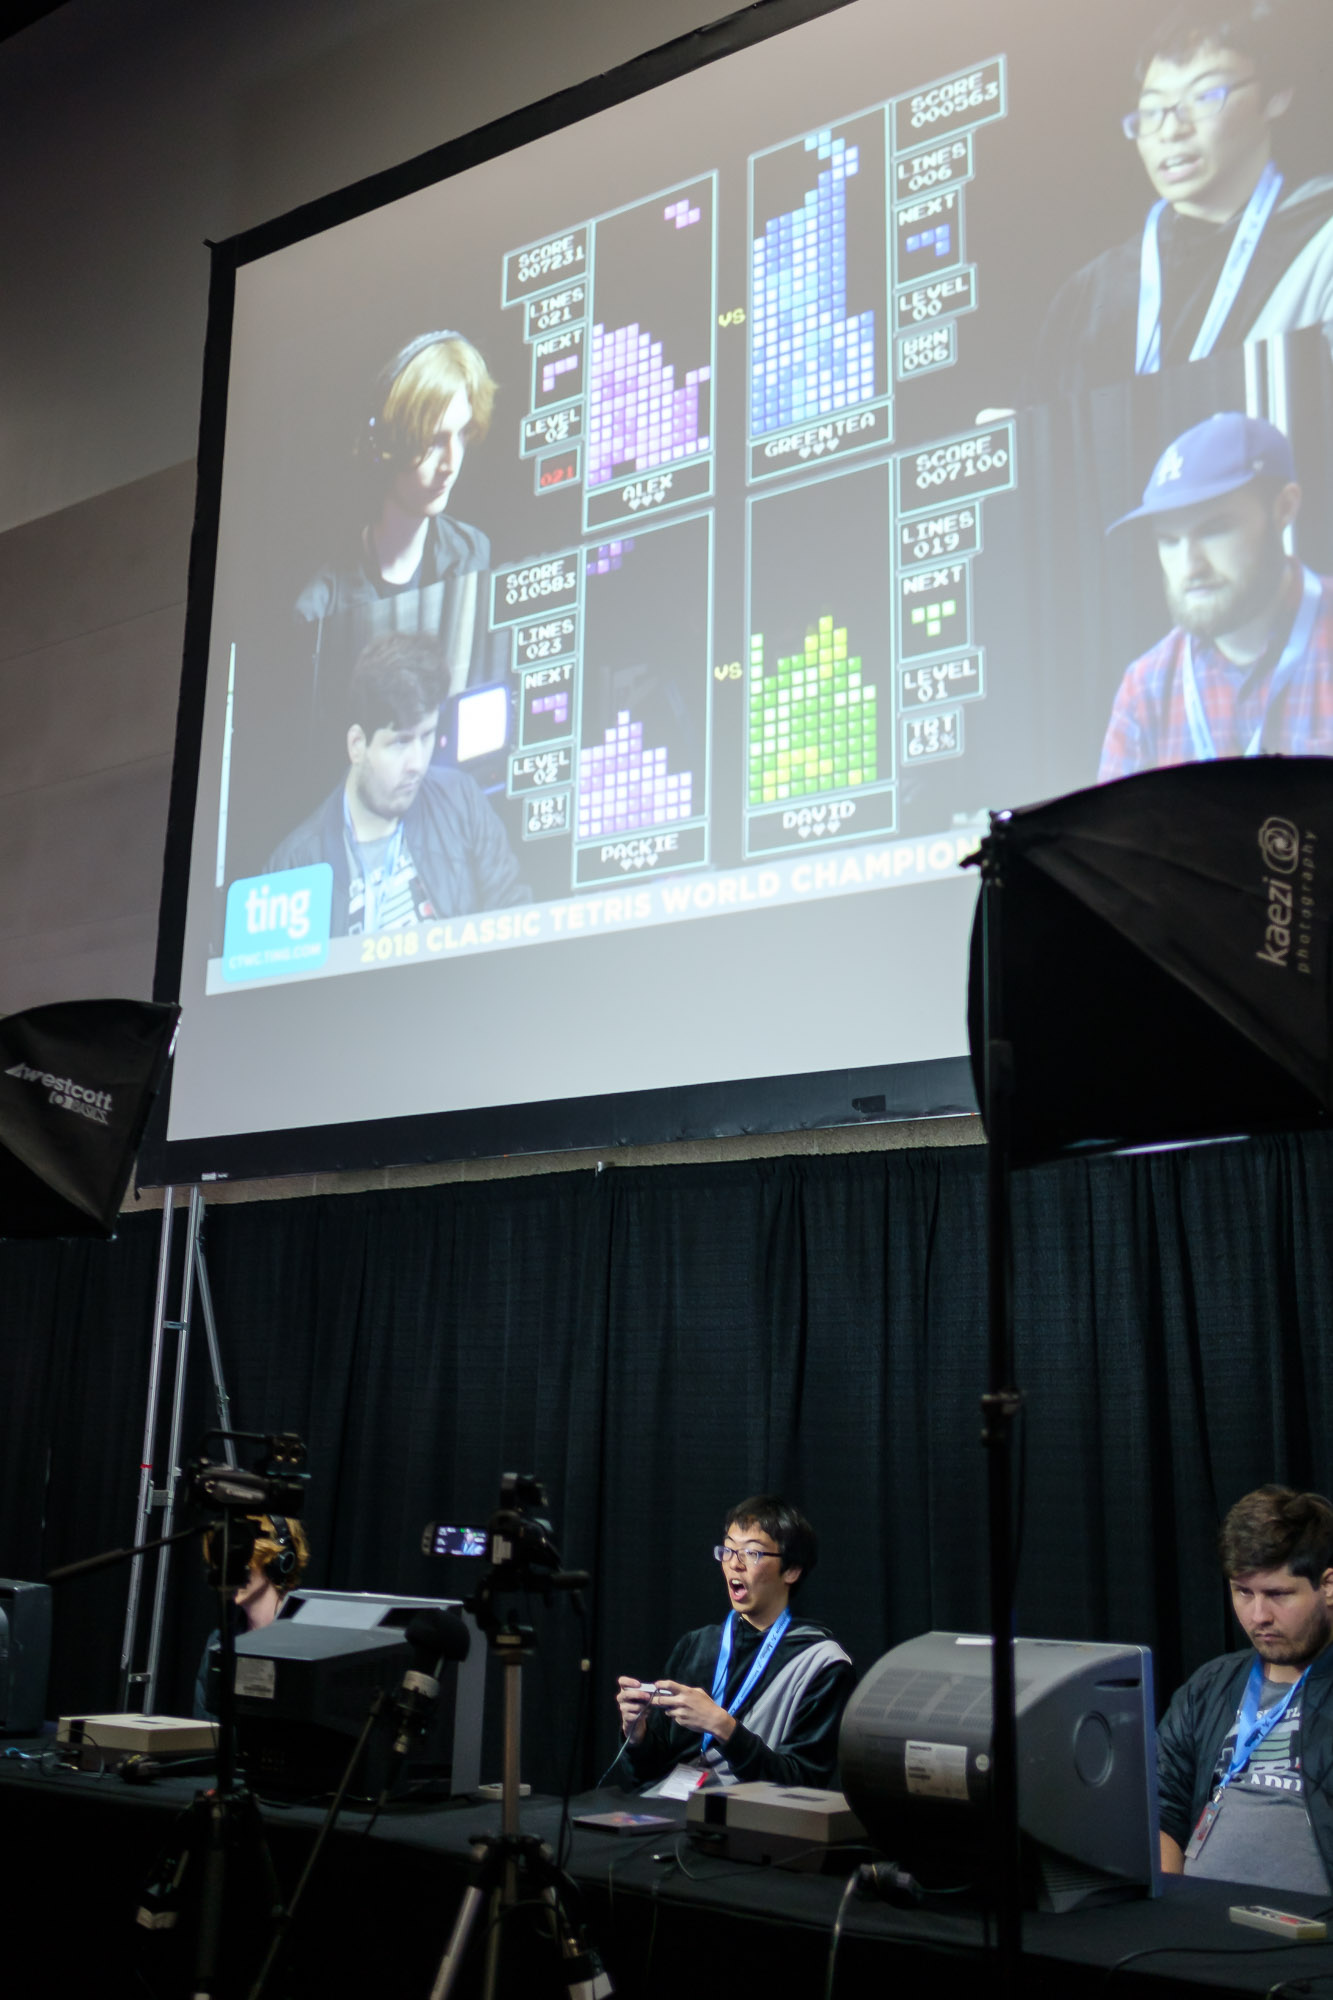 The main stage at CTWC in 2018 with a big projector screen in the back. Players Kitaru, Greentea, and Pacike can be seen playing behind CRT monitors.